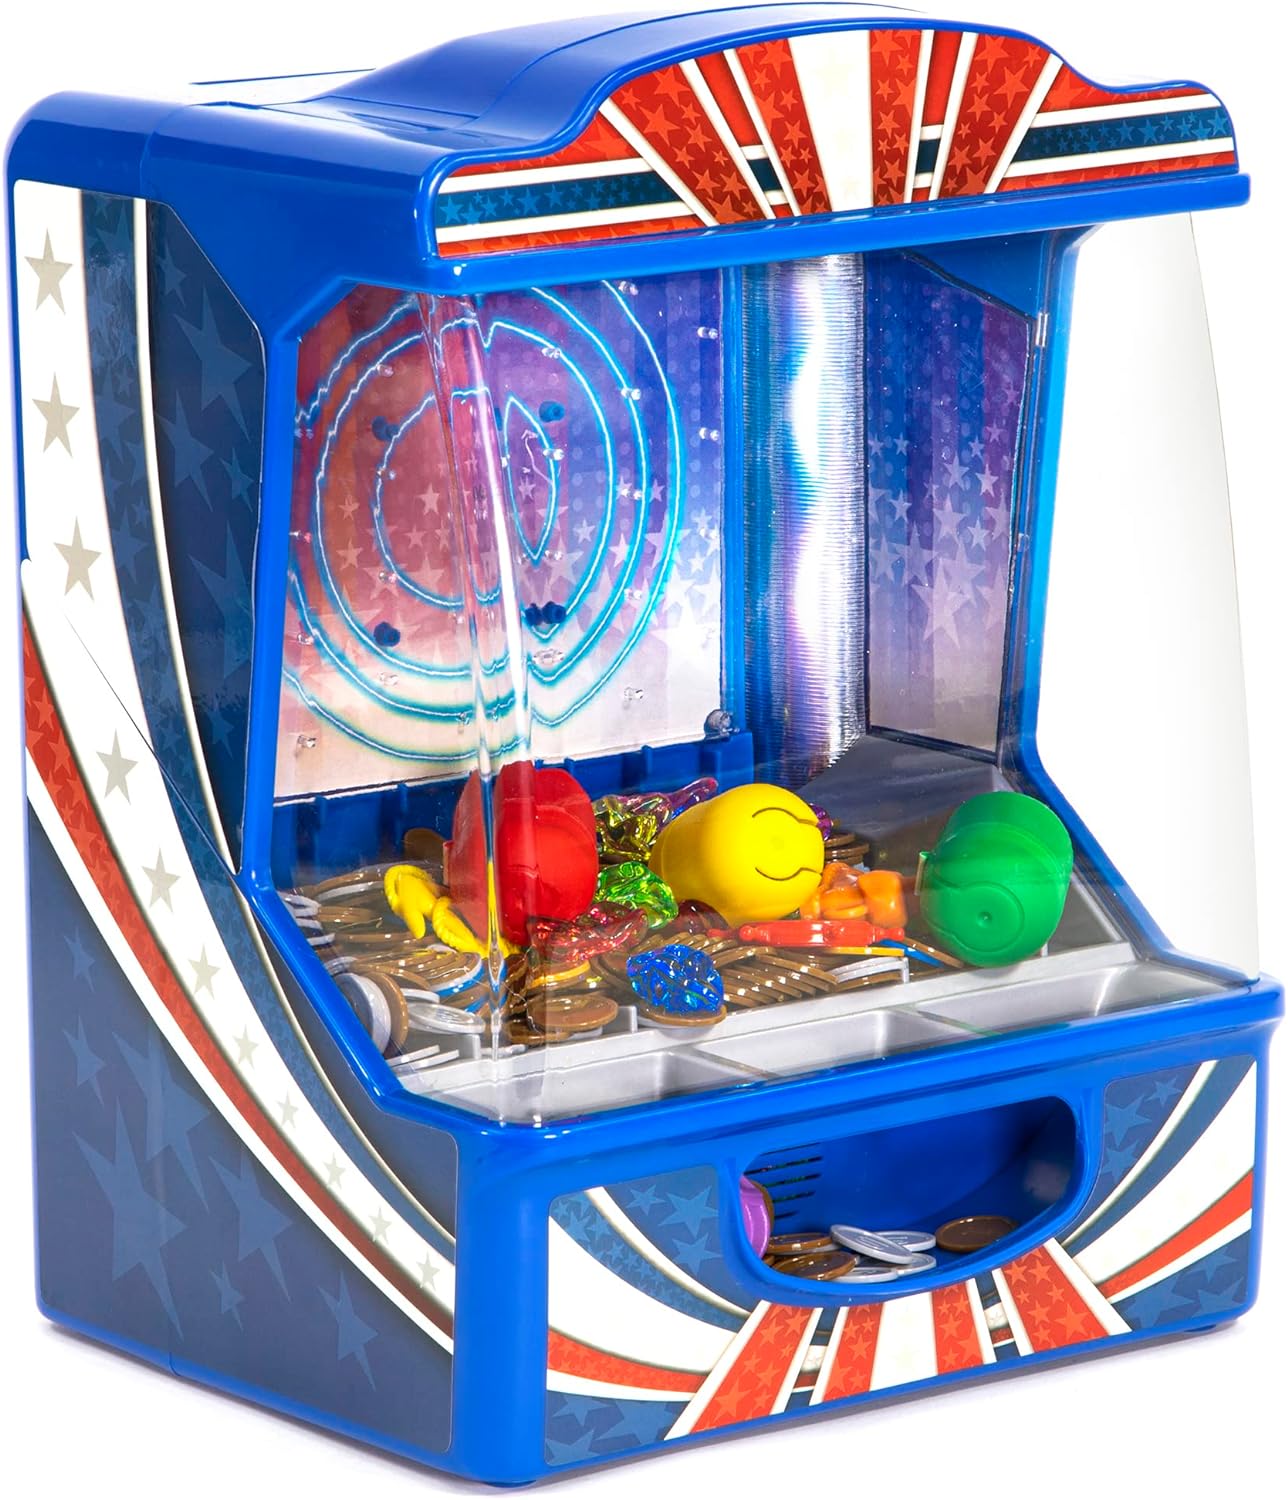 Retro Arcade: Electronic Smash-A-Mole - Tabletop Game, Moles Light Up, 4 Playing Modes, 1-2 Players, Ages 6+